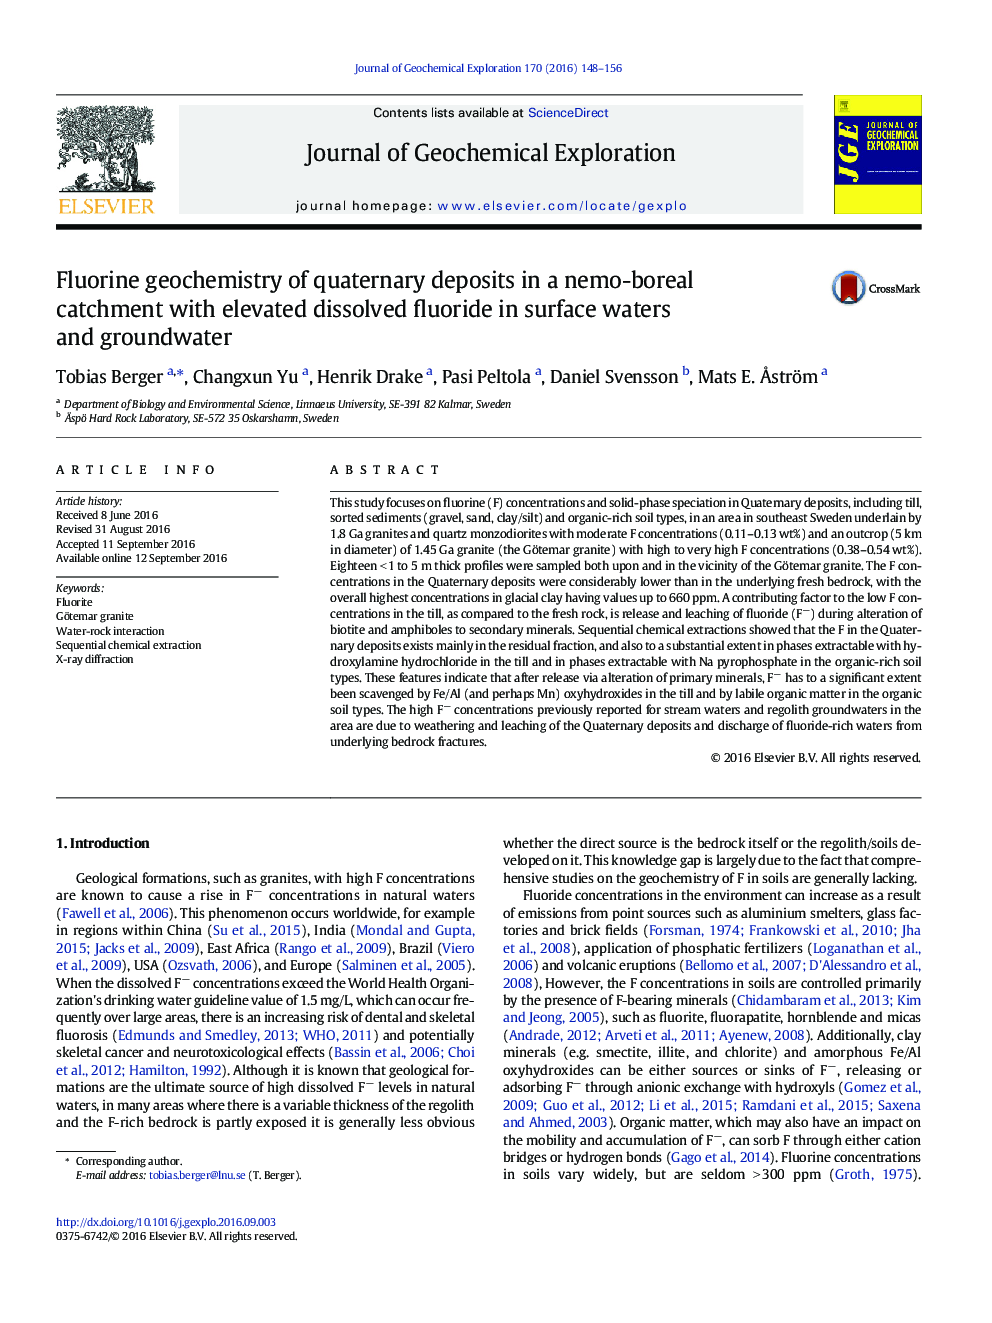 Fluorine geochemistry of quaternary deposits in a nemo-boreal catchment with elevated dissolved fluoride in surface waters and groundwater